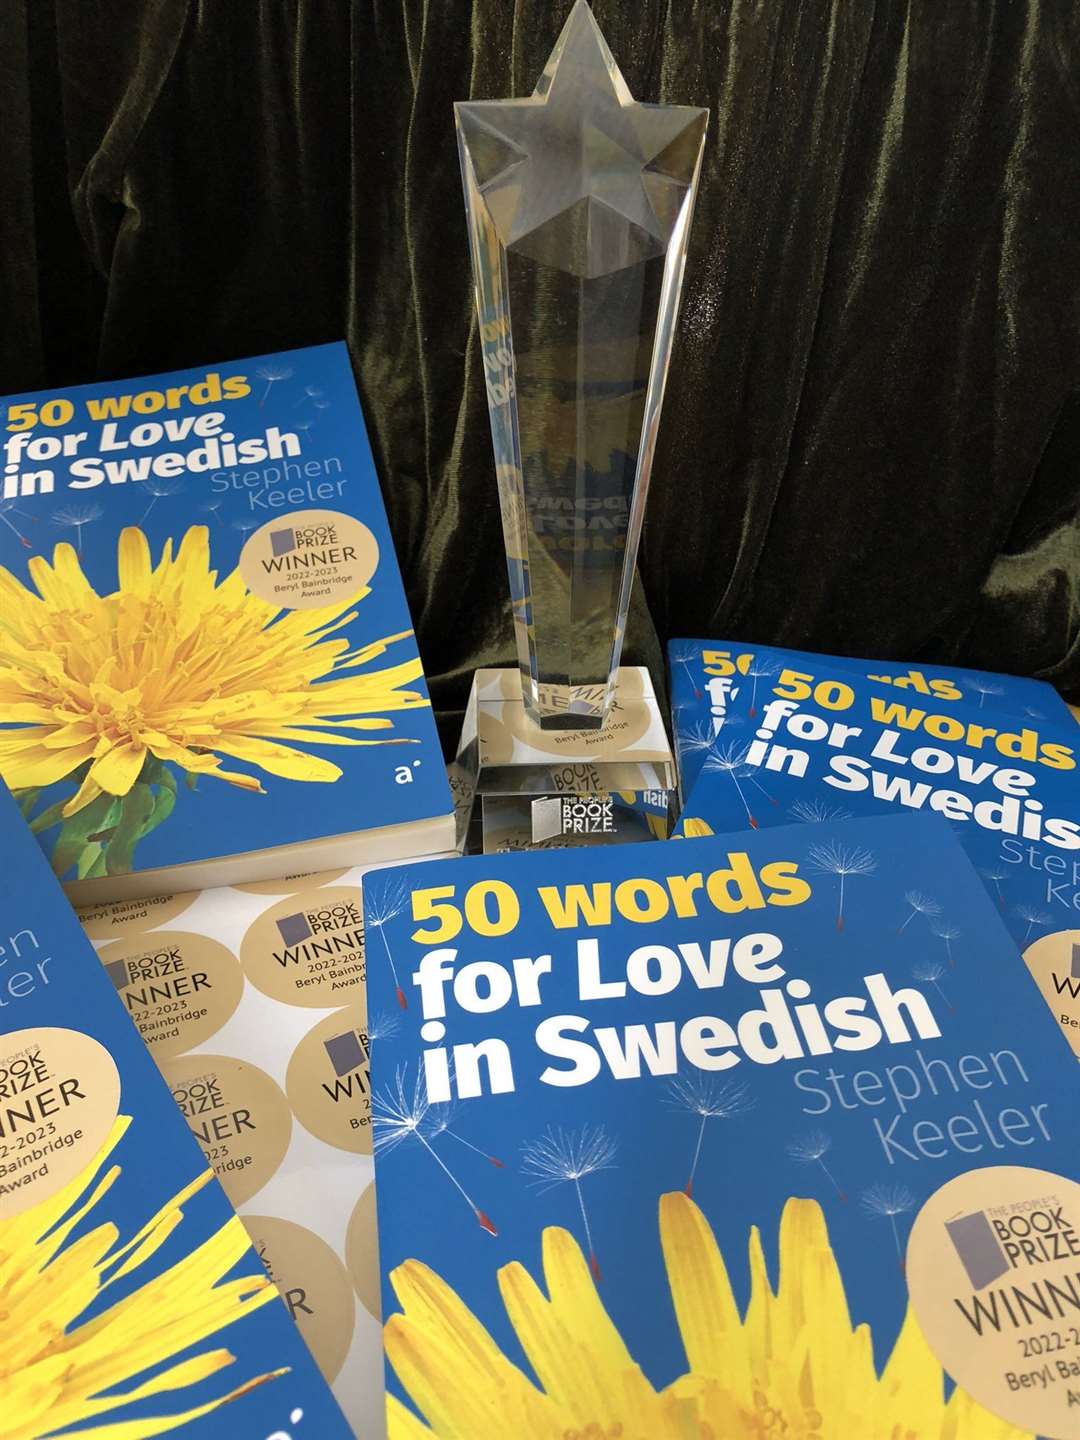 The book award with Stephen's memoir inspired by Swedish words.